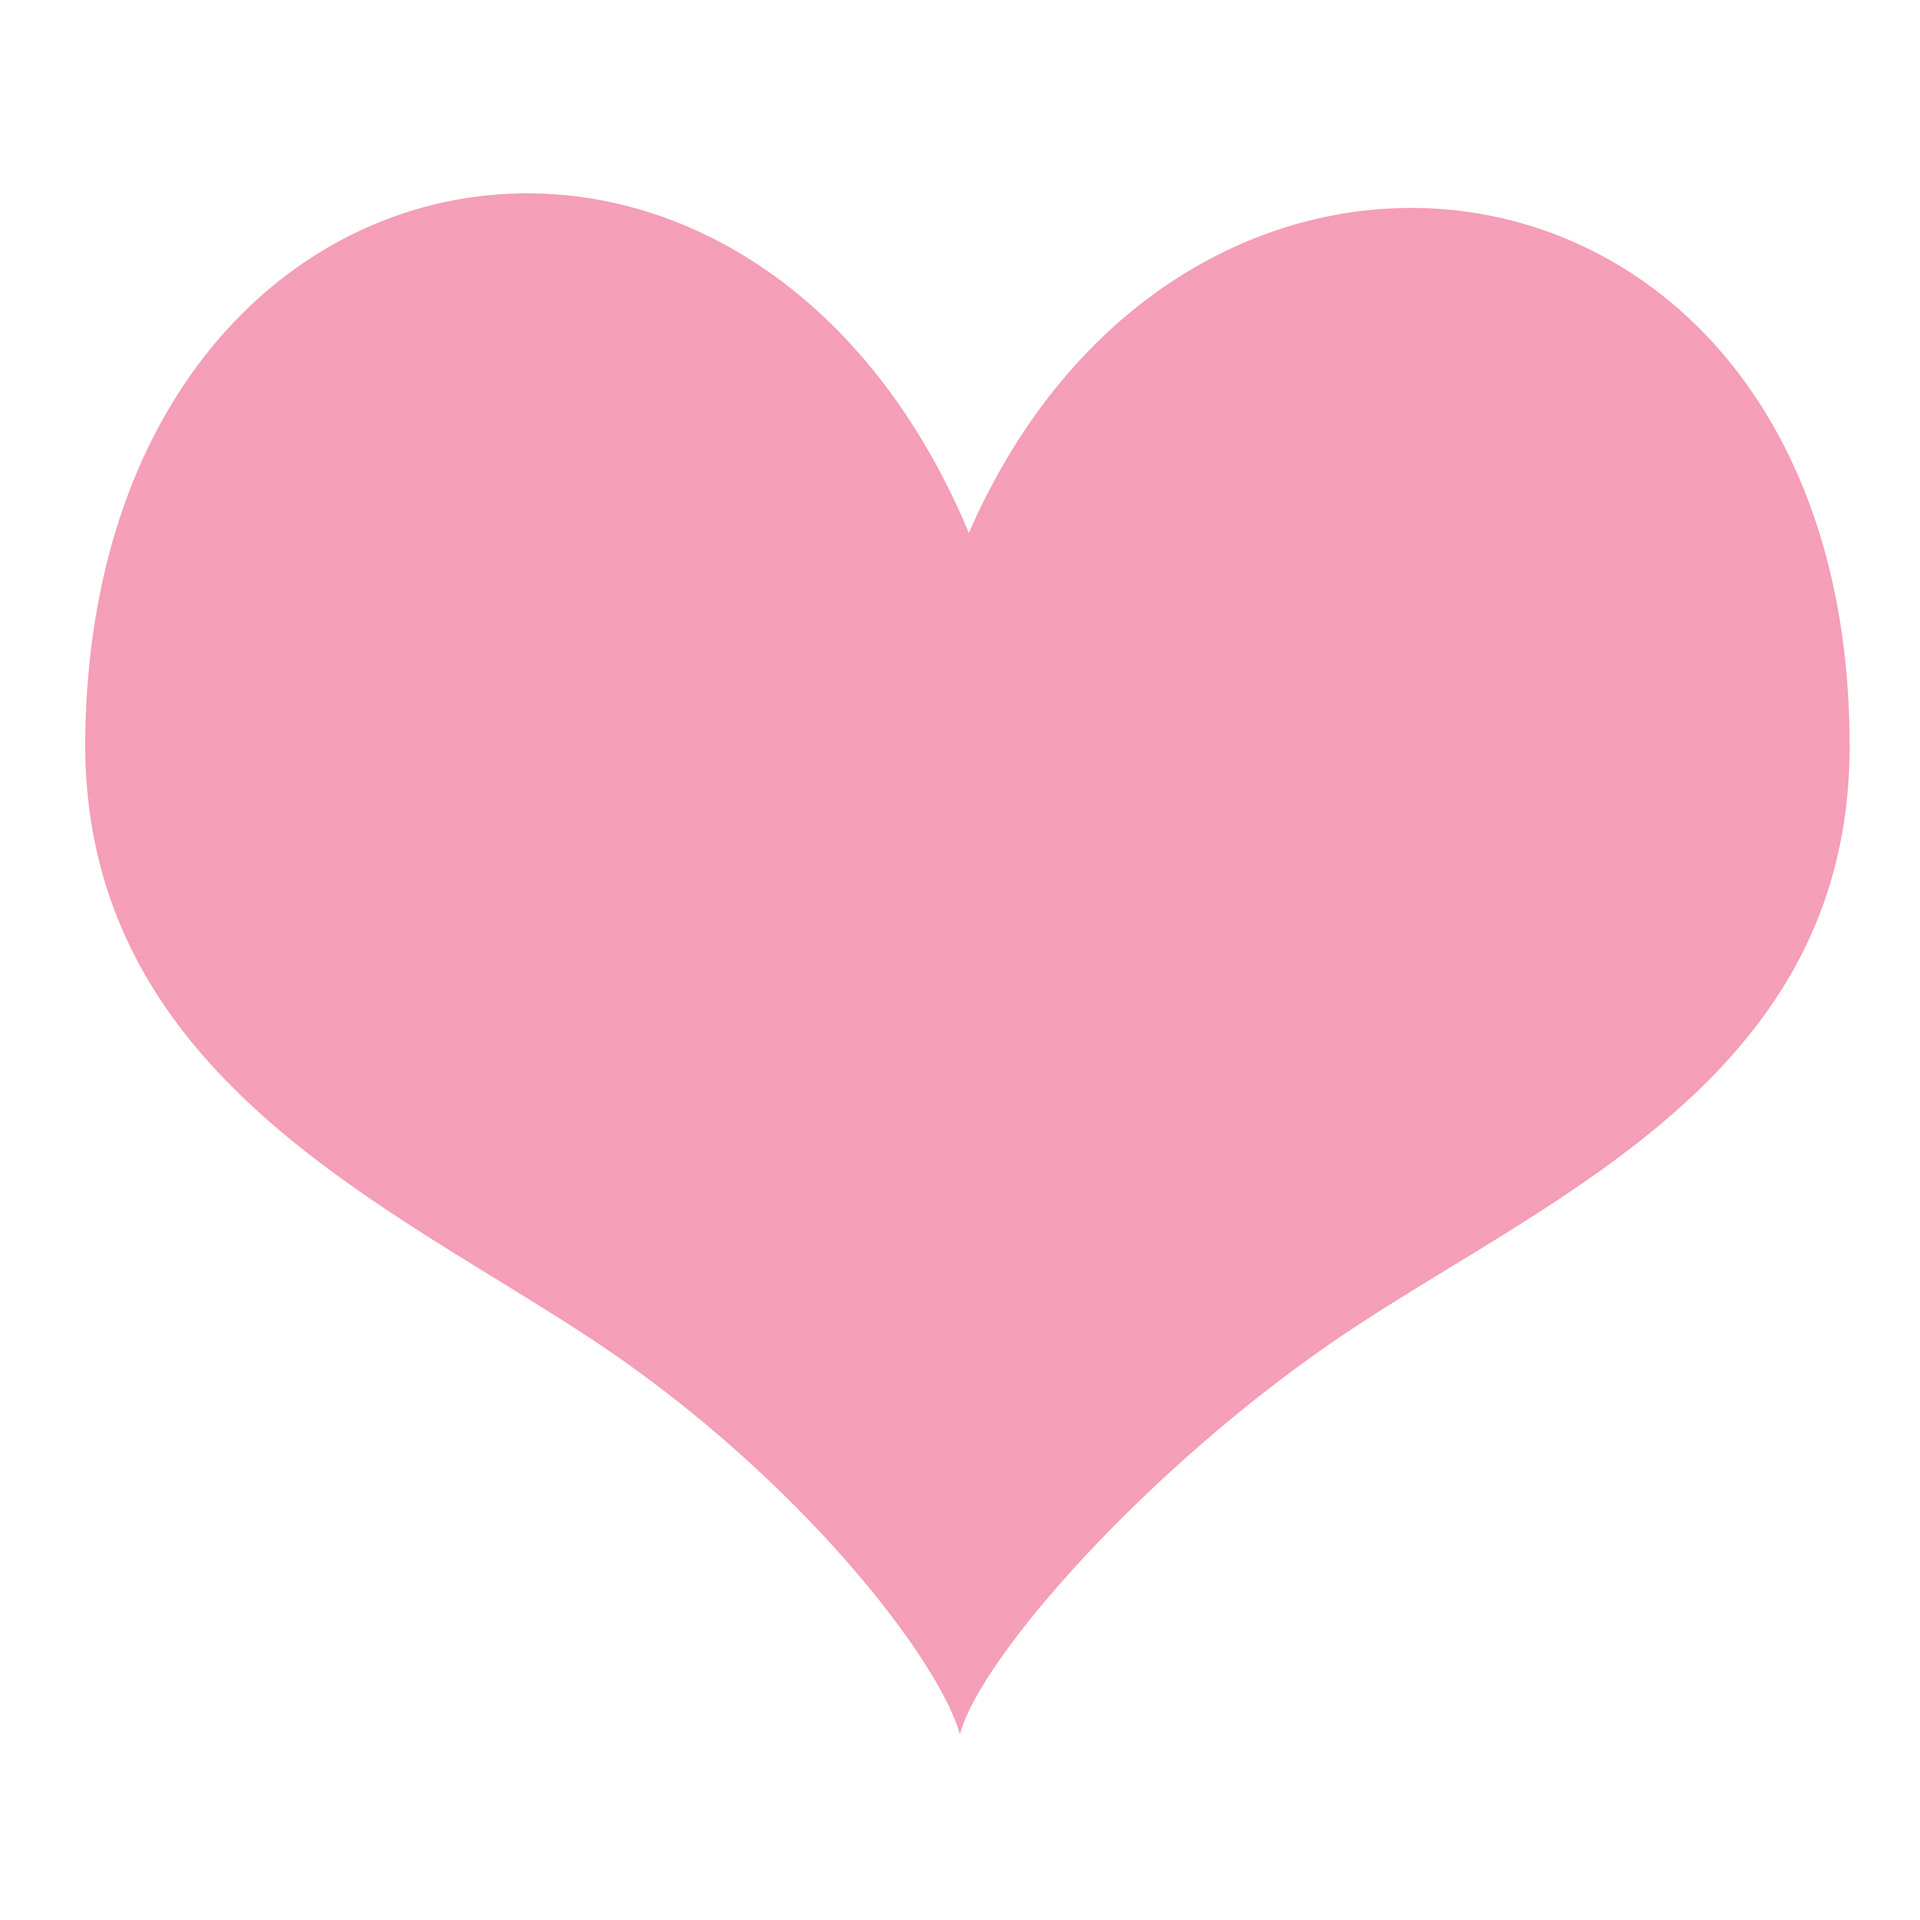 Pink Heart Free Stock Photo Hd   Public Domain Pictures